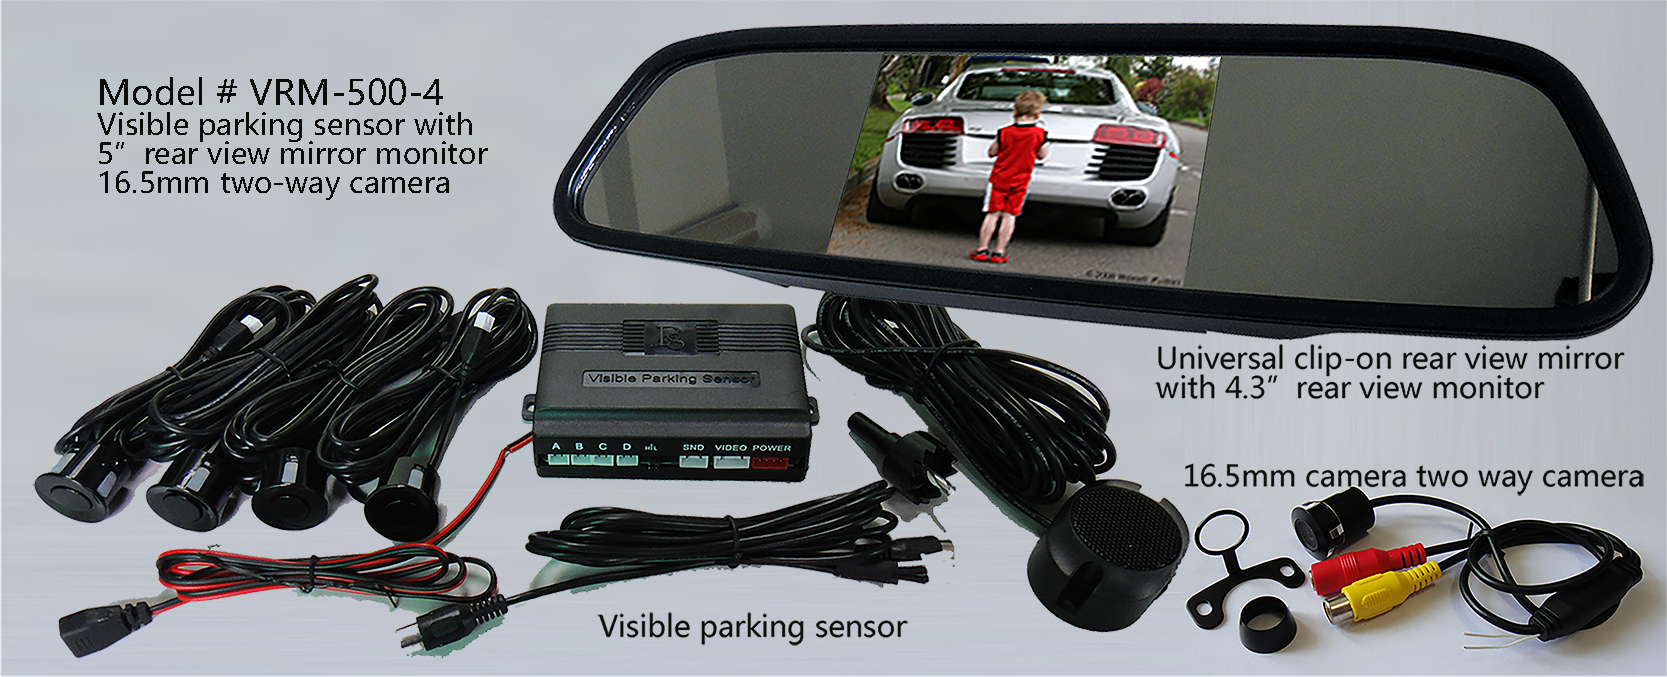 Visible video sensor with clip-on 5